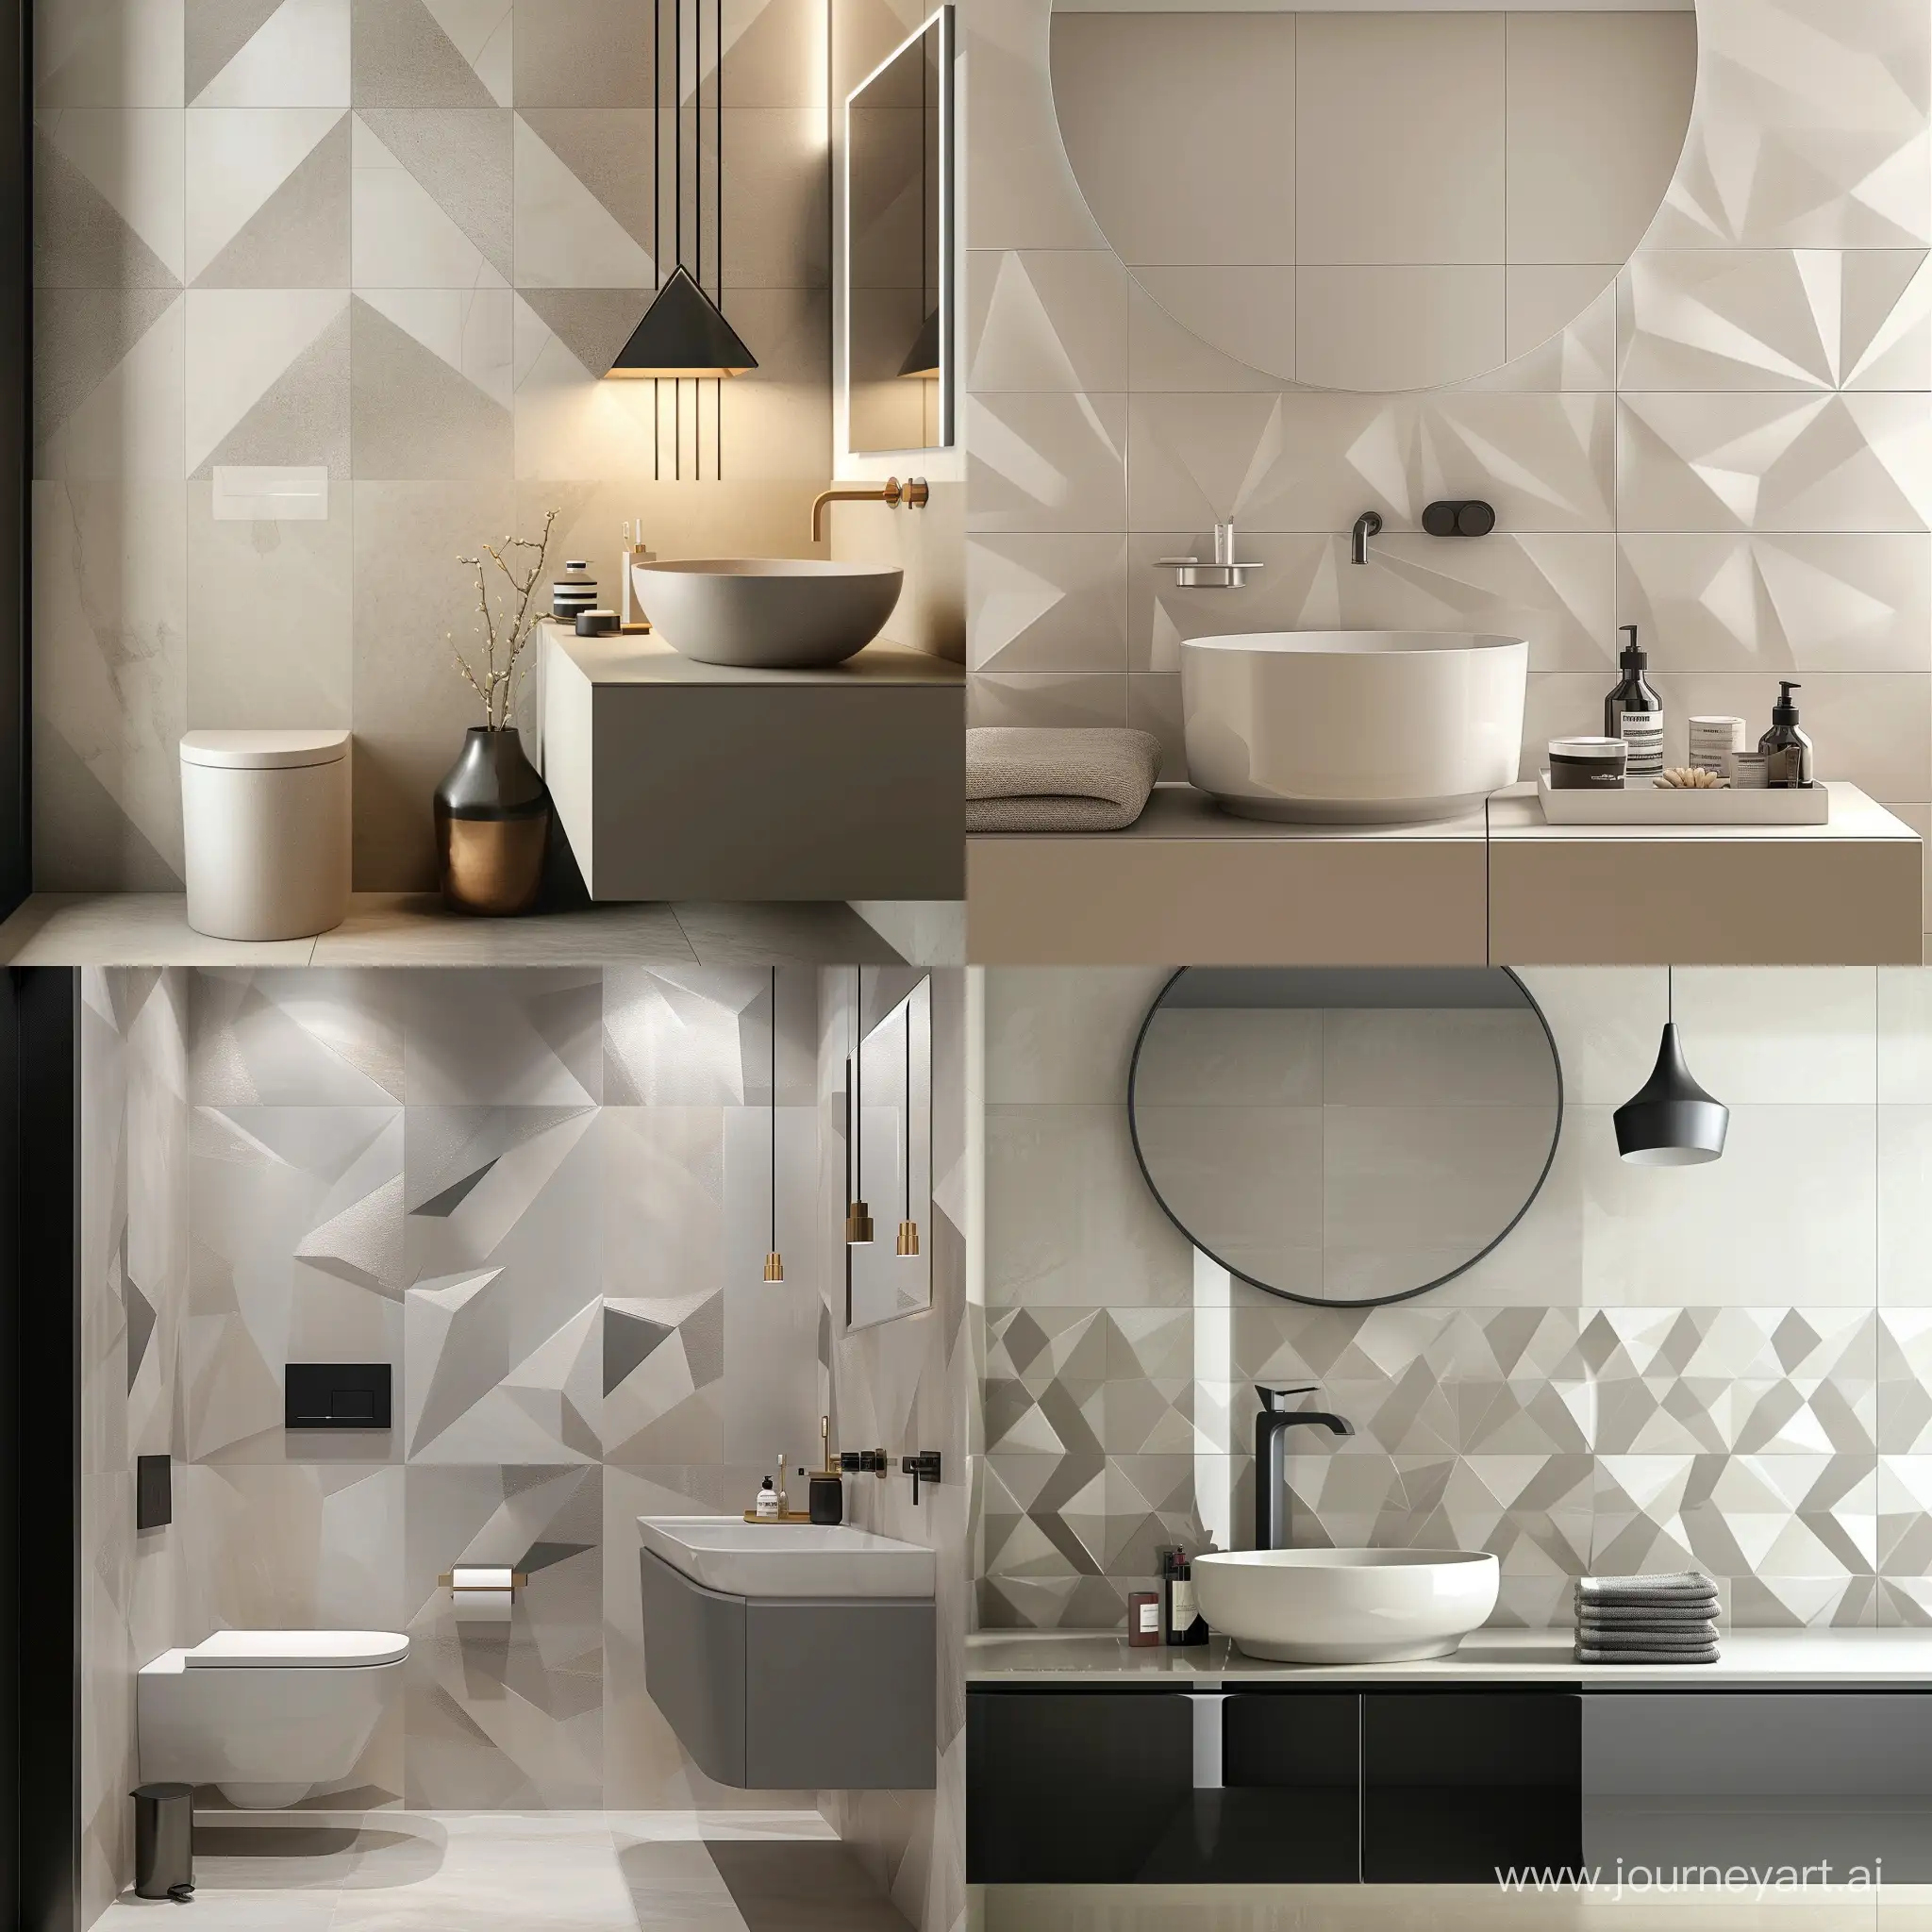 Contemporary-Geometric-Patterned-Bathroom-in-Calm-Tones